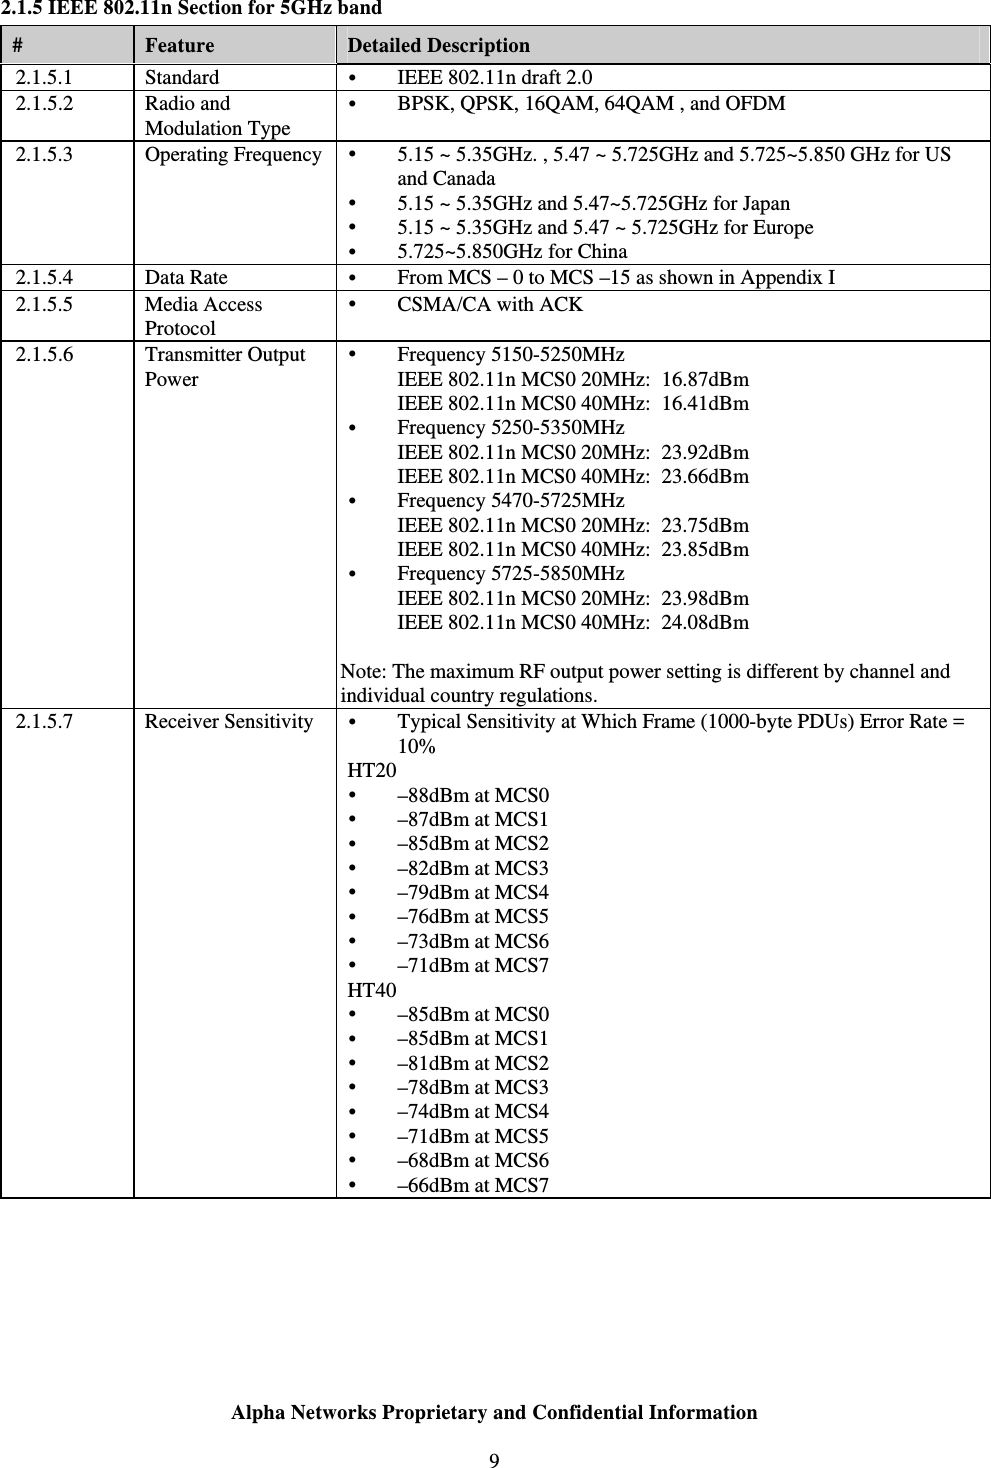  Alpha Networks Proprietary and Confidential Information  9  2.1.5 IEEE 802.11n Section for 5GHz band  #   Feature  Detailed Description 2.1.5.1 Standard   IEEE 802.11n draft 2.0 2.1.5.2 Radio and Modulation Type  BPSK, QPSK, 16QAM, 64QAM , and OFDM 2.1.5.3 Operating Frequency  5.15 ~ 5.35GHz. , 5.47 ~ 5.725GHz and 5.725~5.850 GHz for US and Canada  5.15 ~ 5.35GHz and 5.47~5.725GHz for Japan  5.15 ~ 5.35GHz and 5.47 ~ 5.725GHz for Europe  5.725~5.850GHz for China 2.1.5.4 Data Rate   From MCS – 0 to MCS –15 as shown in Appendix I 2.1.5.5 Media Access Protocol  CSMA/CA with ACK 2.1.5.6 Transmitter Output Power  Frequency 5150-5250MHz IEEE 802.11n MCS0 20MHz:  16.87dBm IEEE 802.11n MCS0 40MHz:  16.41dBm  Frequency 5250-5350MHz IEEE 802.11n MCS0 20MHz:  23.92dBm IEEE 802.11n MCS0 40MHz:  23.66dBm  Frequency 5470-5725MHz IEEE 802.11n MCS0 20MHz:  23.75dBm IEEE 802.11n MCS0 40MHz:  23.85dBm  Frequency 5725-5850MHz IEEE 802.11n MCS0 20MHz:  23.98dBm IEEE 802.11n MCS0 40MHz:  24.08dBm  Note: The maximum RF output power setting is different by channel and individual country regulations. 2.1.5.7  Receiver Sensitivity    Typical Sensitivity at Which Frame (1000-byte PDUs) Error Rate = 10% HT20  –88dBm at MCS0  –87dBm at MCS1  –85dBm at MCS2  –82dBm at MCS3  –79dBm at MCS4  –76dBm at MCS5  –73dBm at MCS6  –71dBm at MCS7 HT40  –85dBm at MCS0  –85dBm at MCS1  –81dBm at MCS2  –78dBm at MCS3  –74dBm at MCS4  –71dBm at MCS5  –68dBm at MCS6  –66dBm at MCS7    